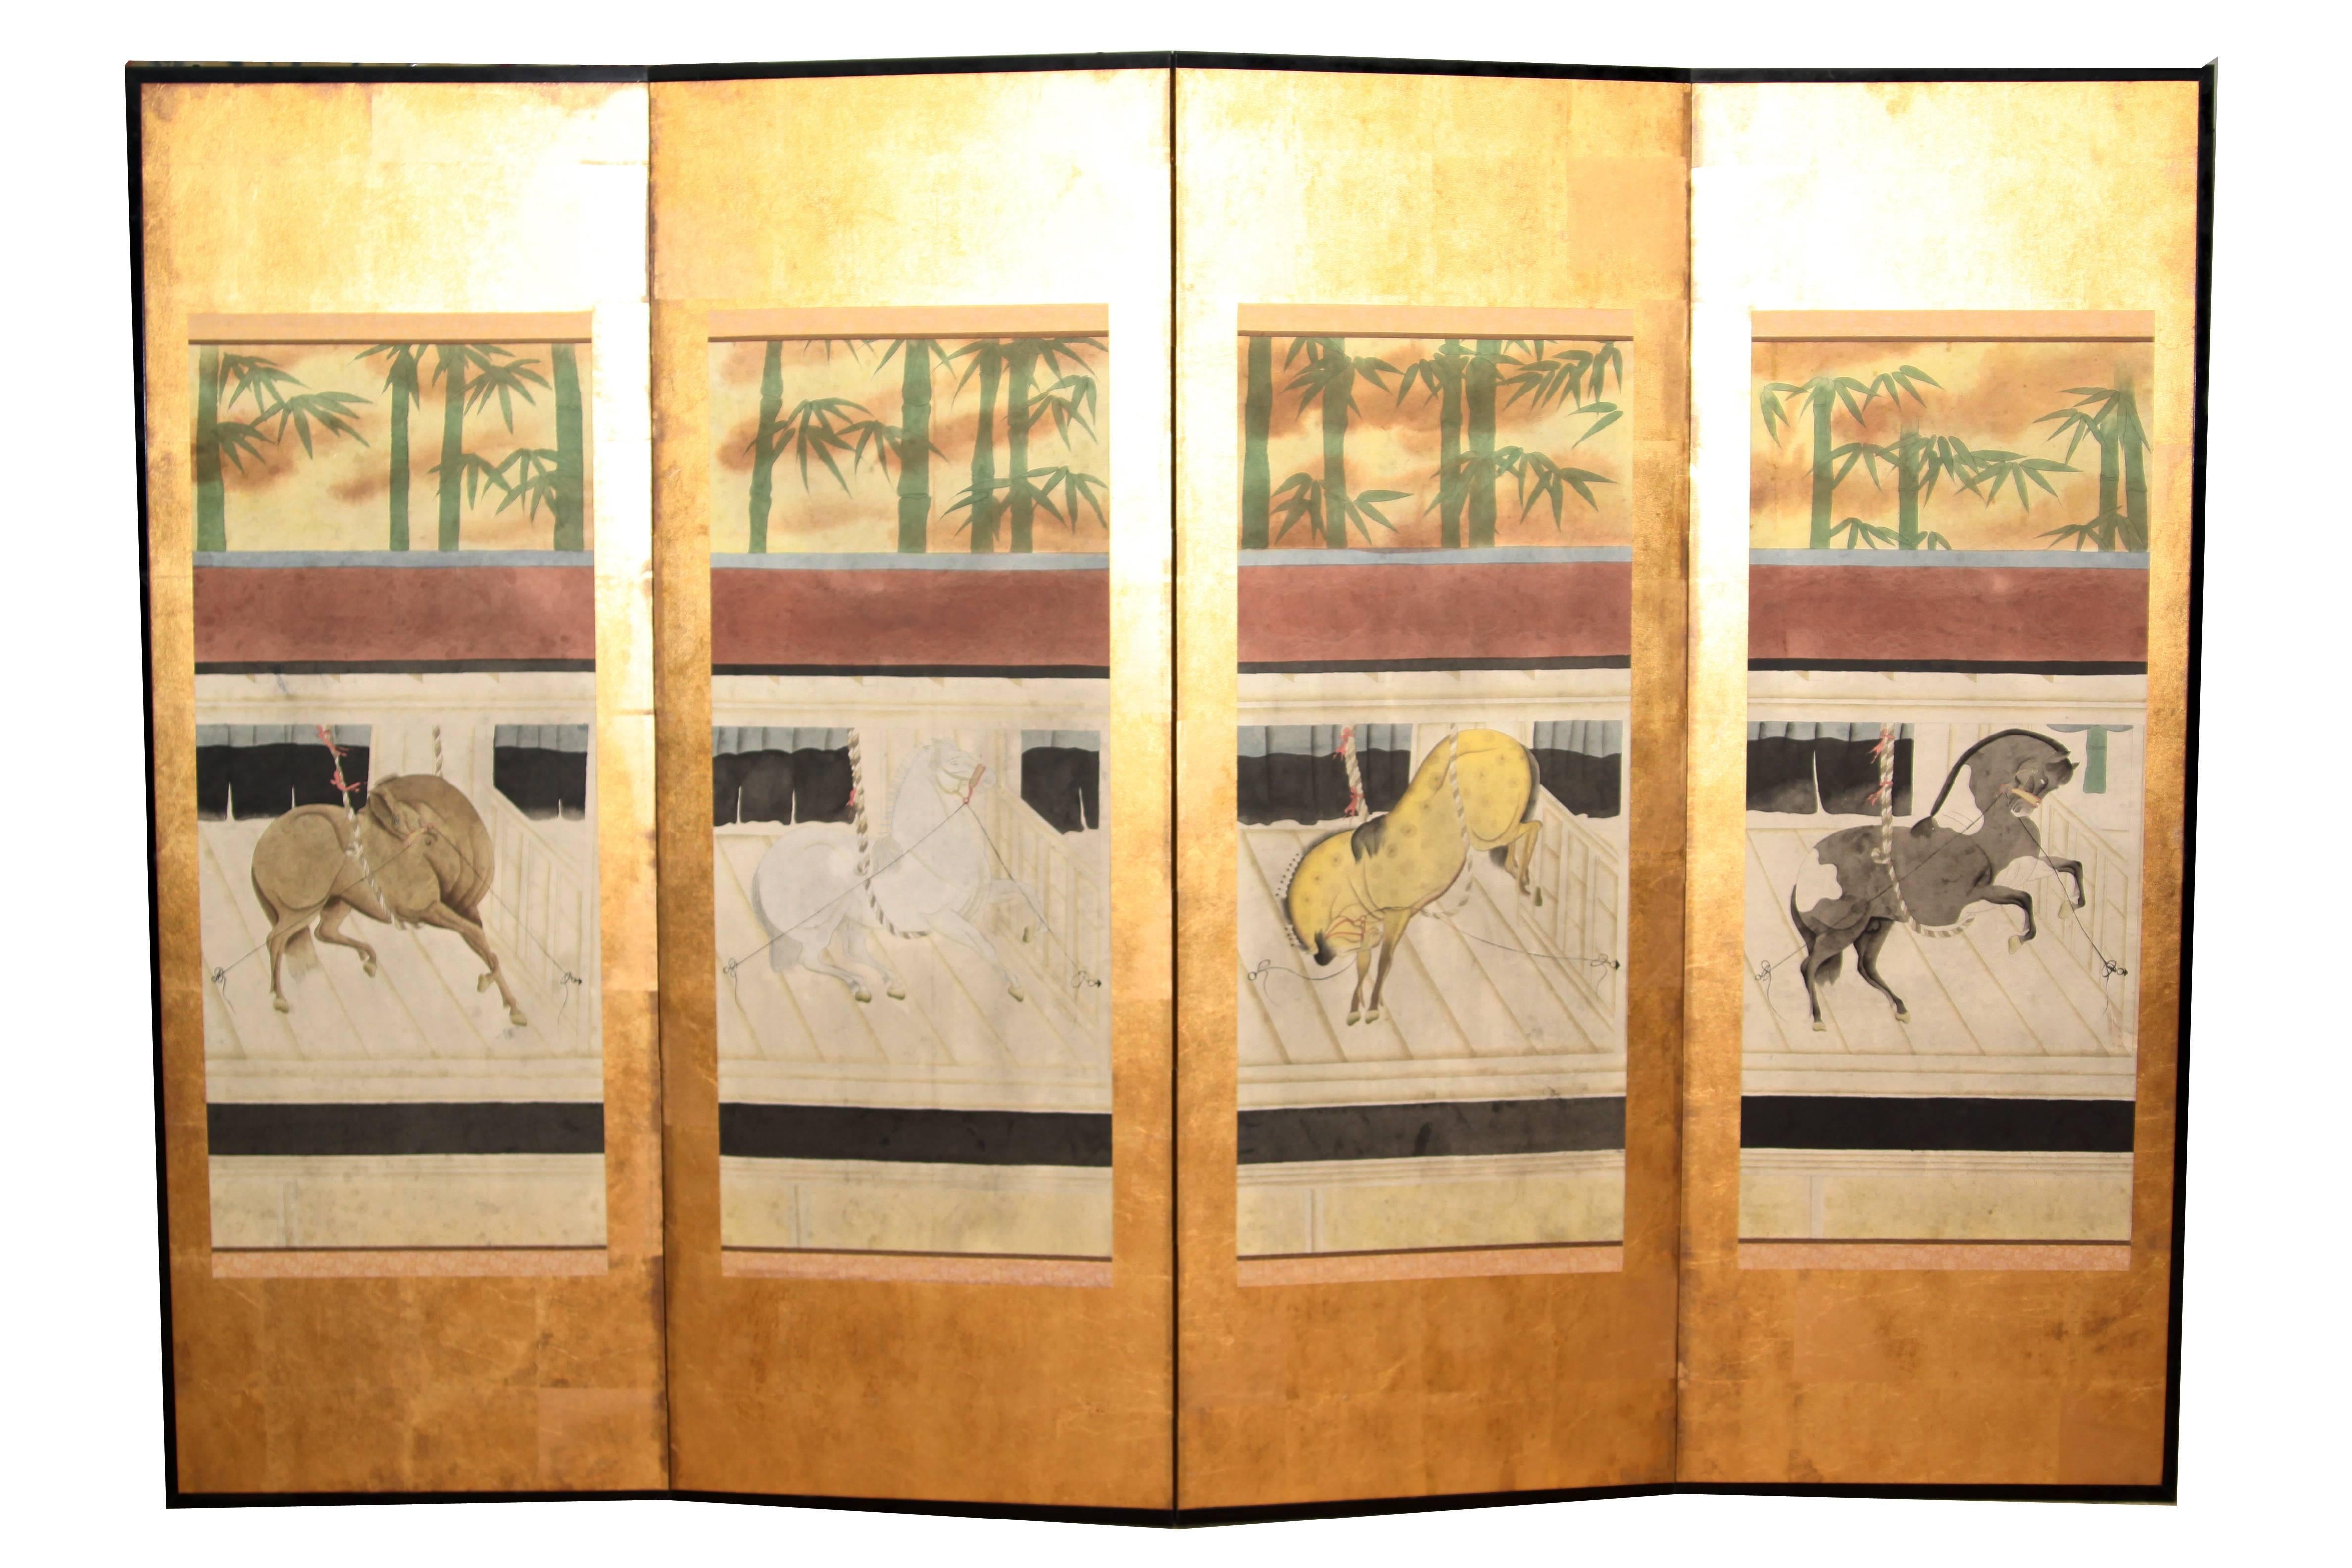 The horses in a stabile painting of this four-panel screen are hand painted in watercolor on rice paper, with a border consisting of gold leaf squares, carefully mounted over jointed wooden lattice frames. Lacquer rails are then applied to the